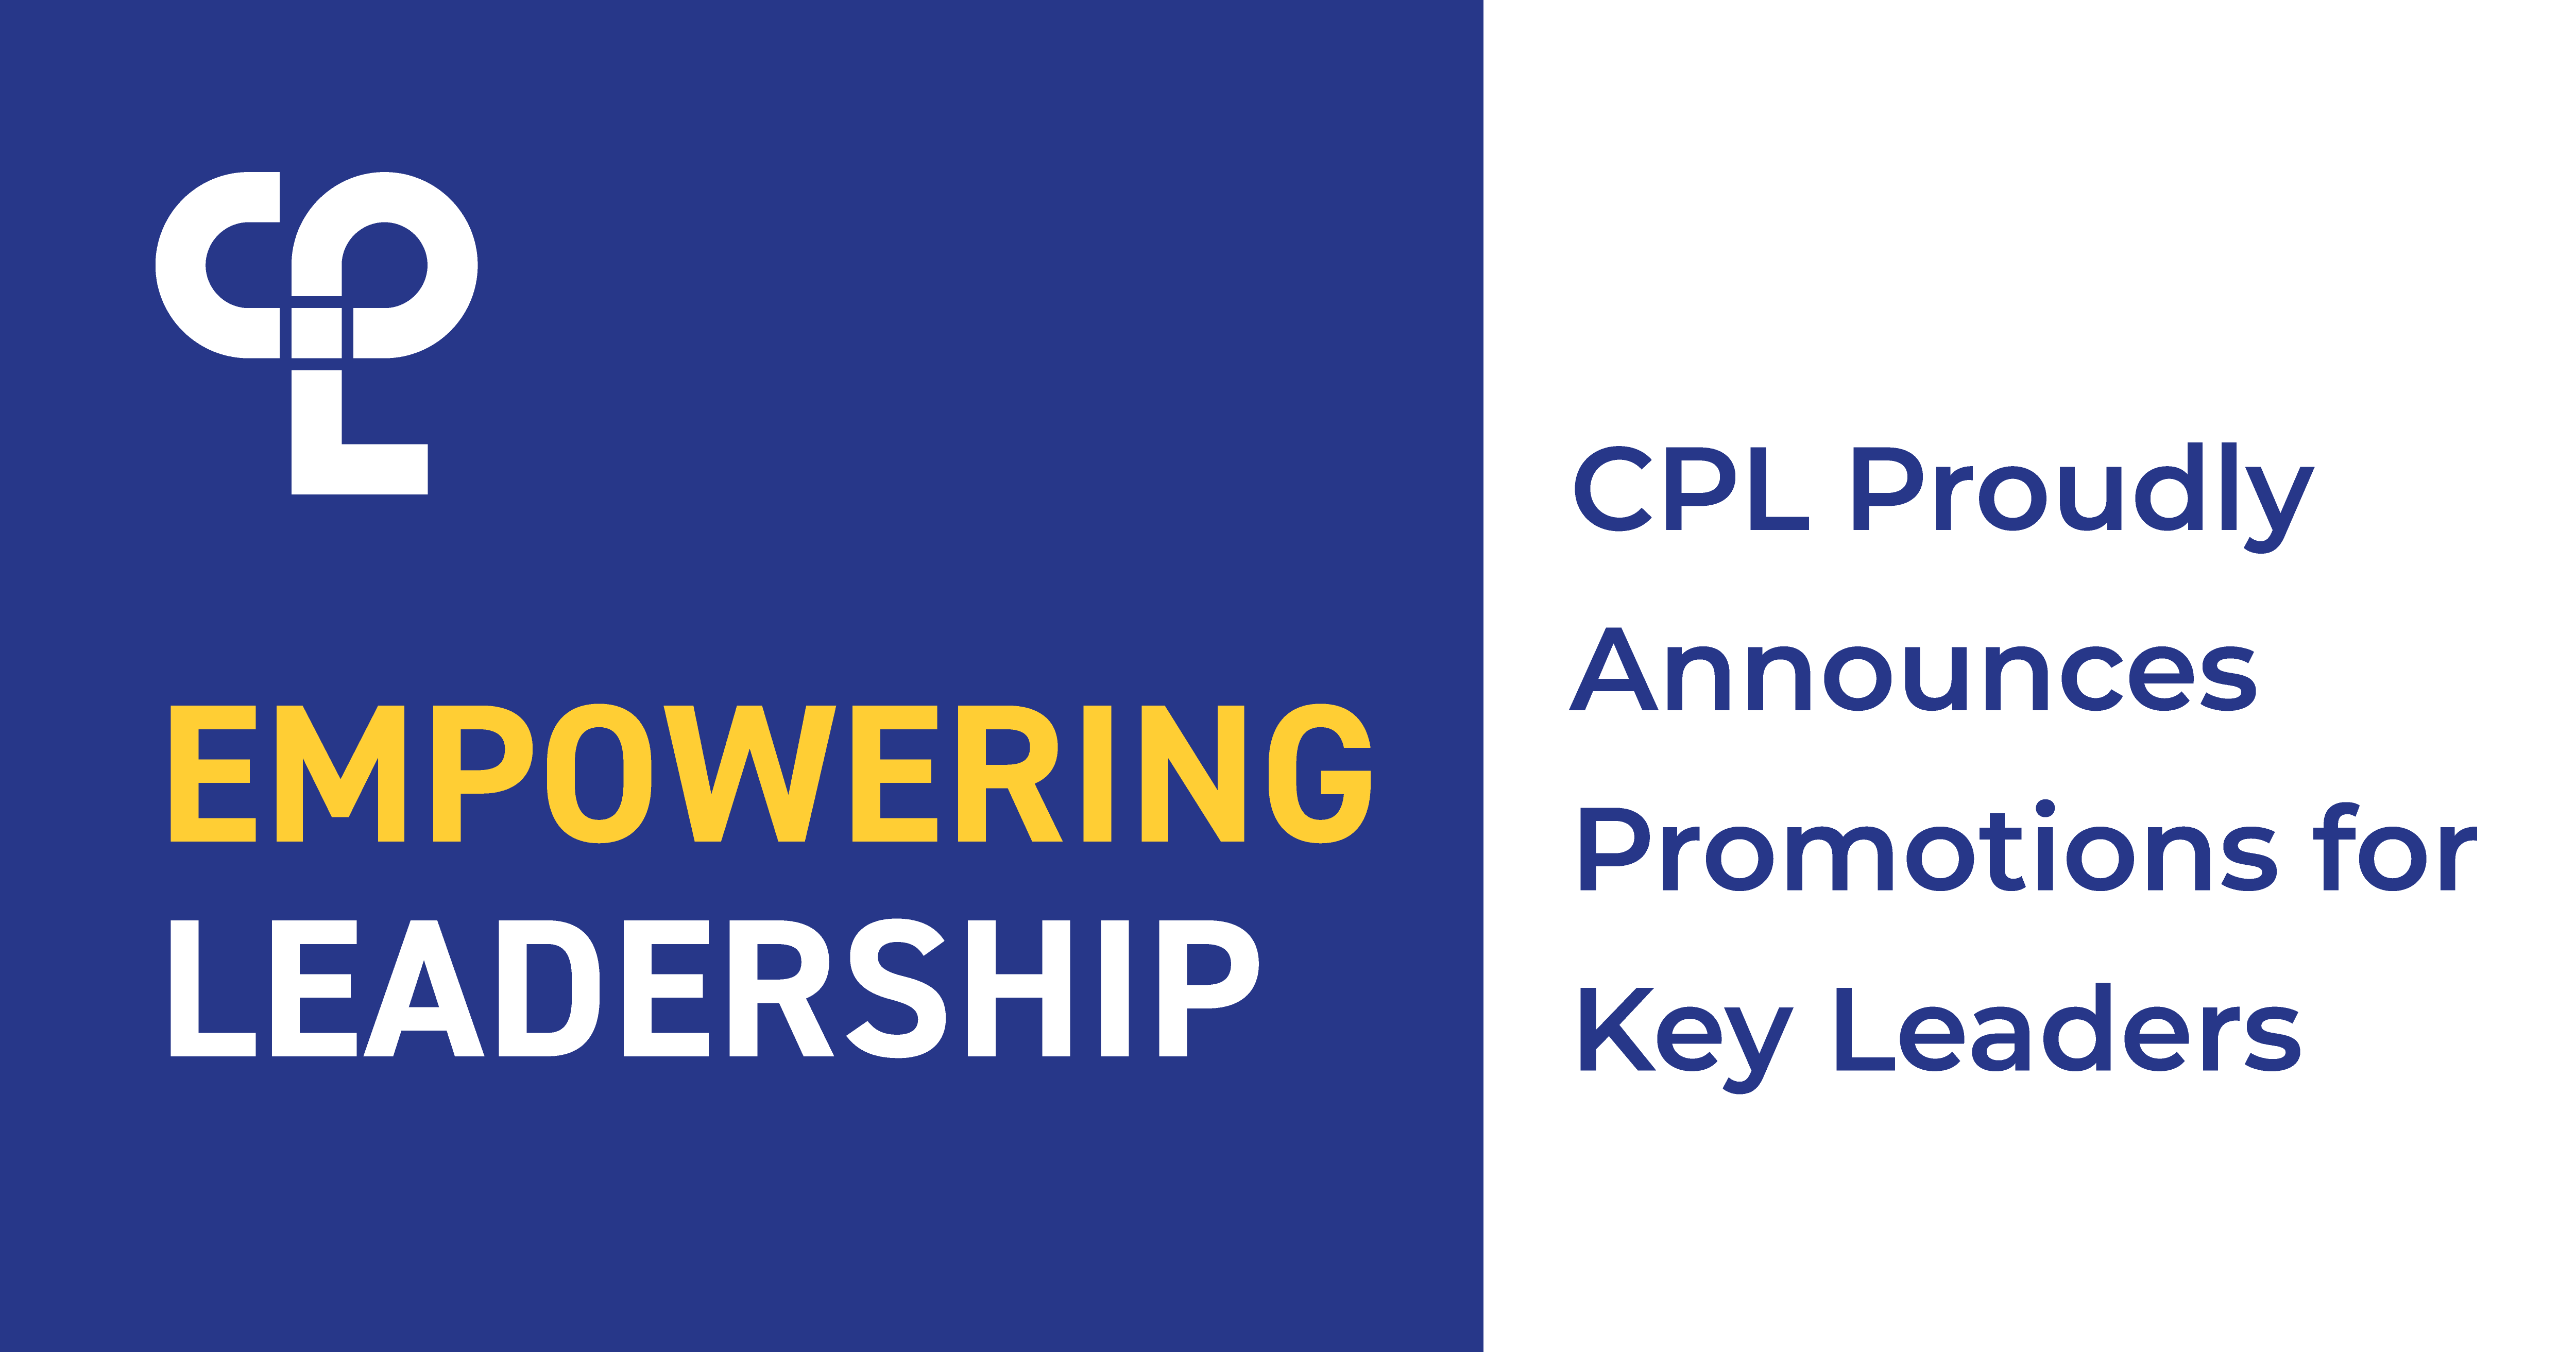 Image shows a graphic. The left side is dark blue and shows the white CPL logo and reads "Empowering Leadership." The right side is white with dark blue text that reads "CPL Proudly Announces Promotions for Key Leaders."